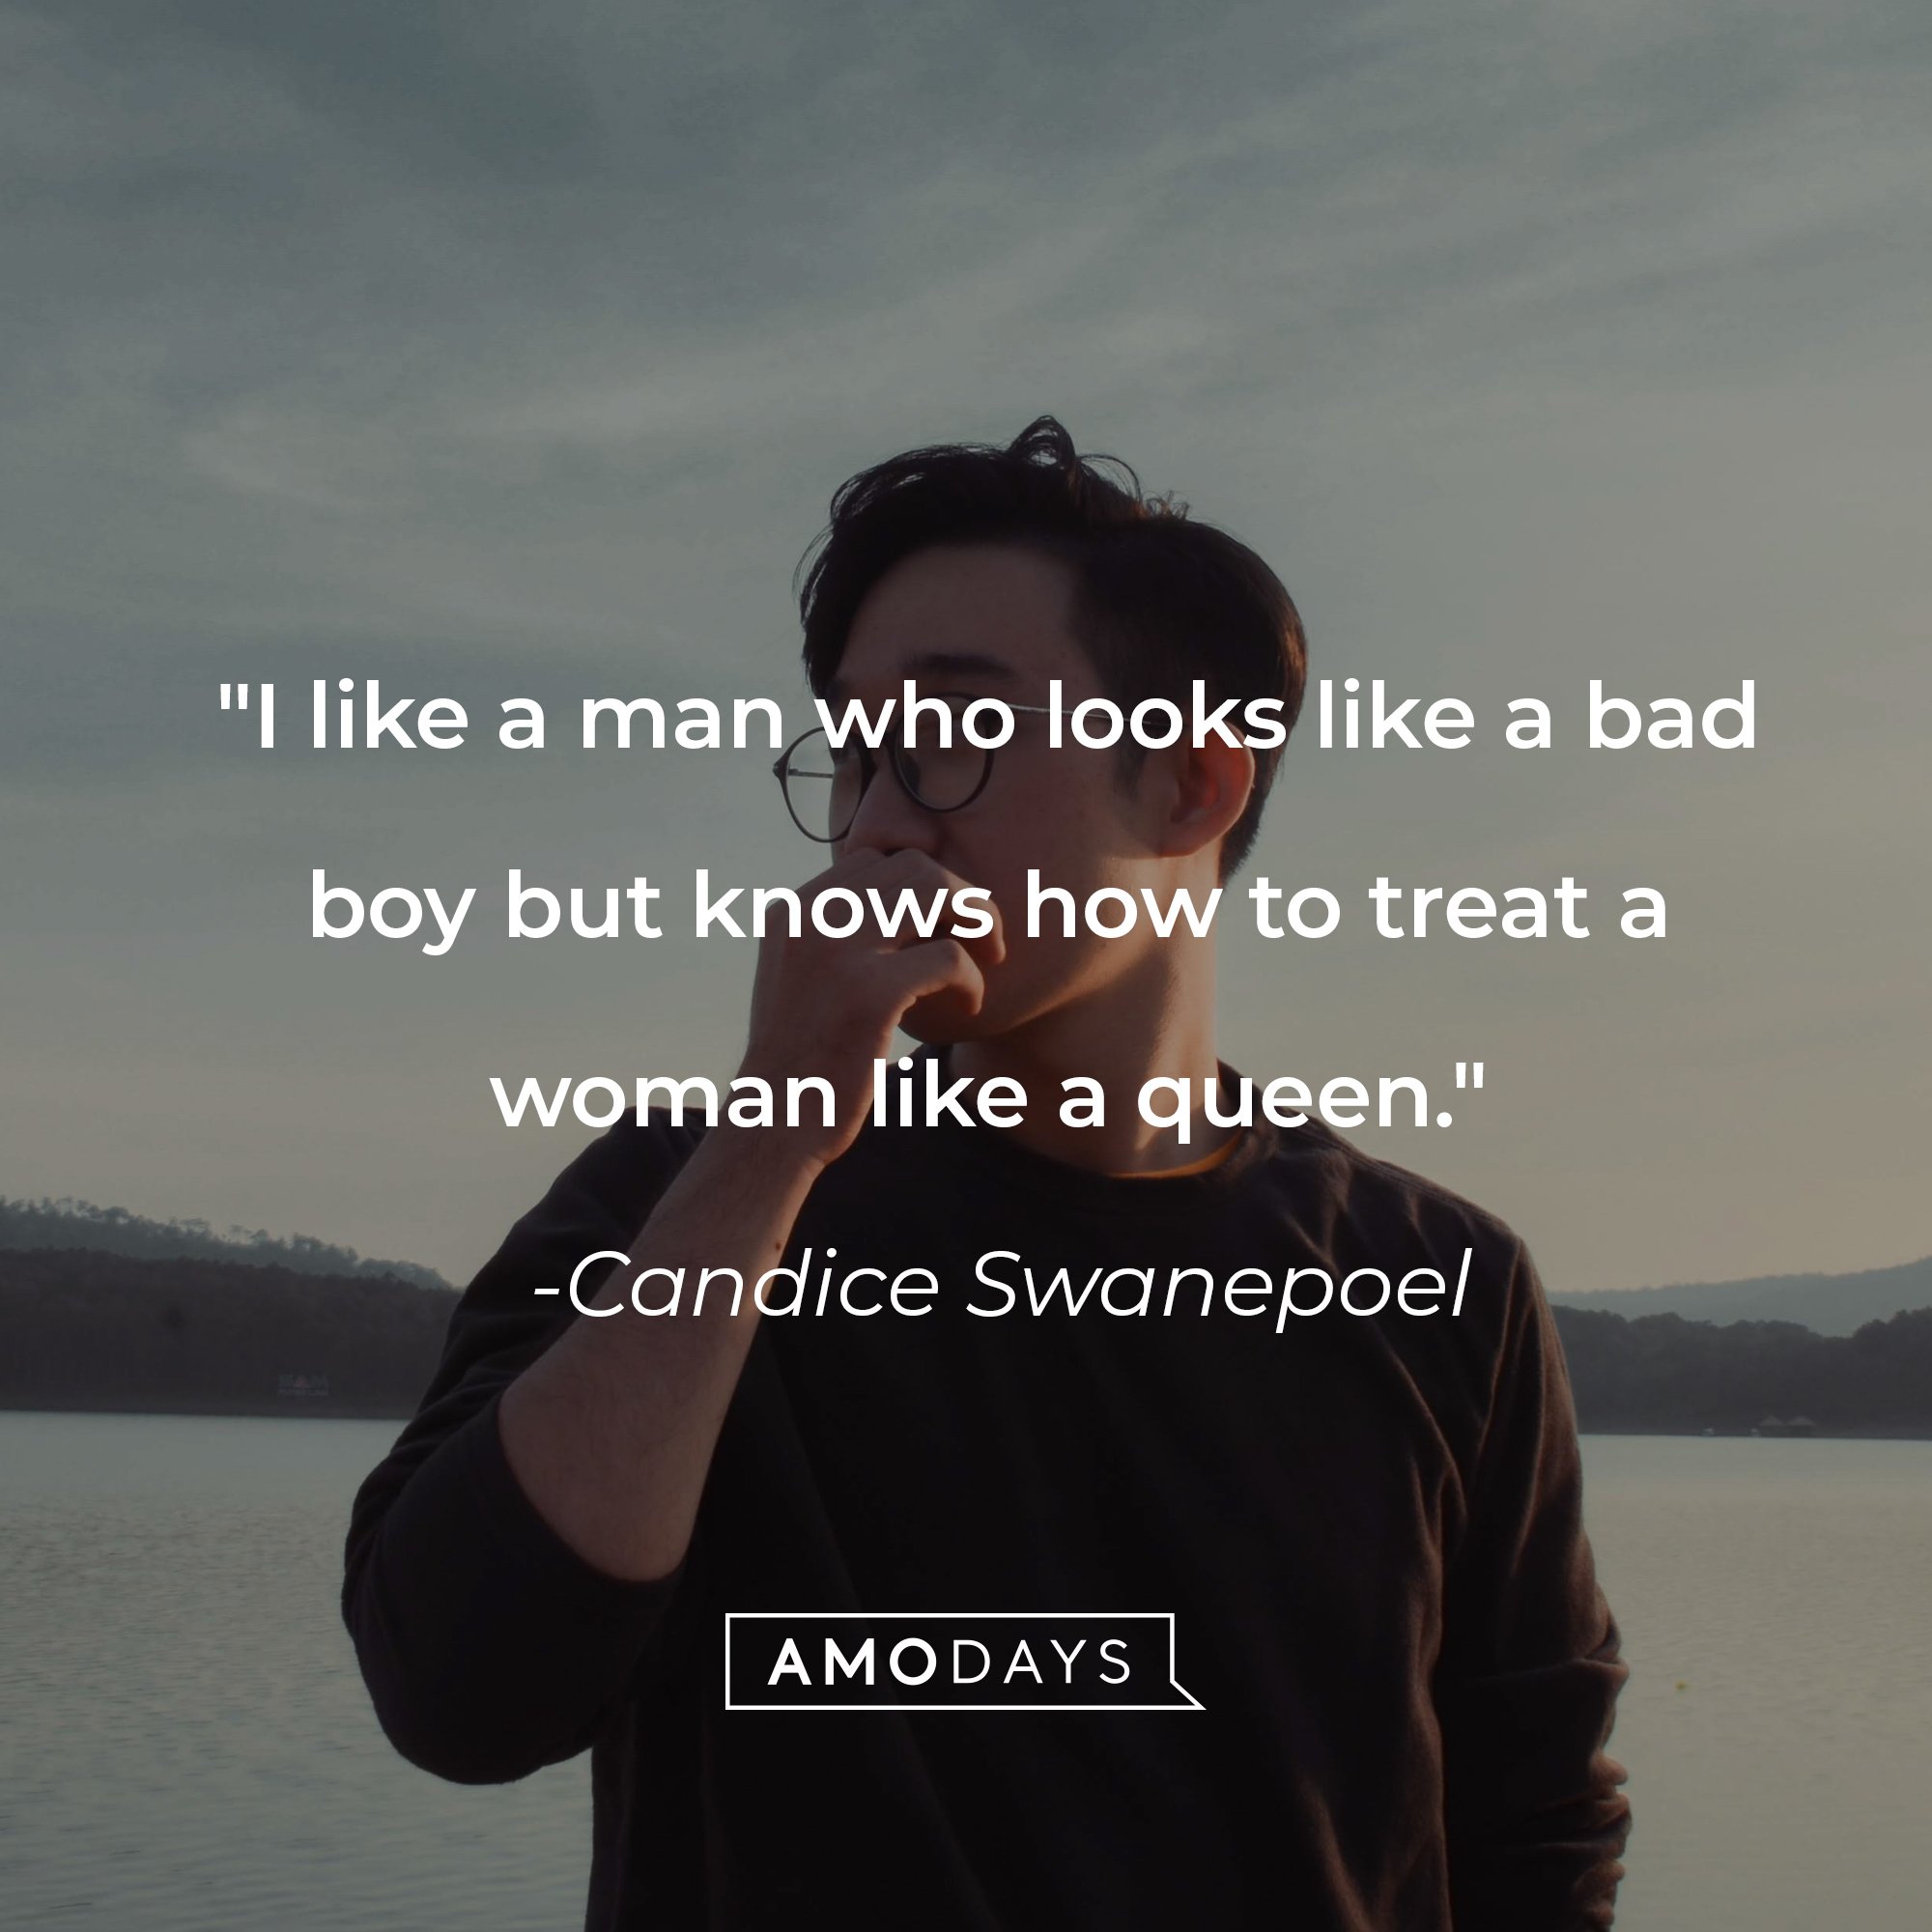 Candice Swanepoel's quote: "I like a man who looks like a bad boy but knows how to treat a woman like a queen." | Image: AmoDays